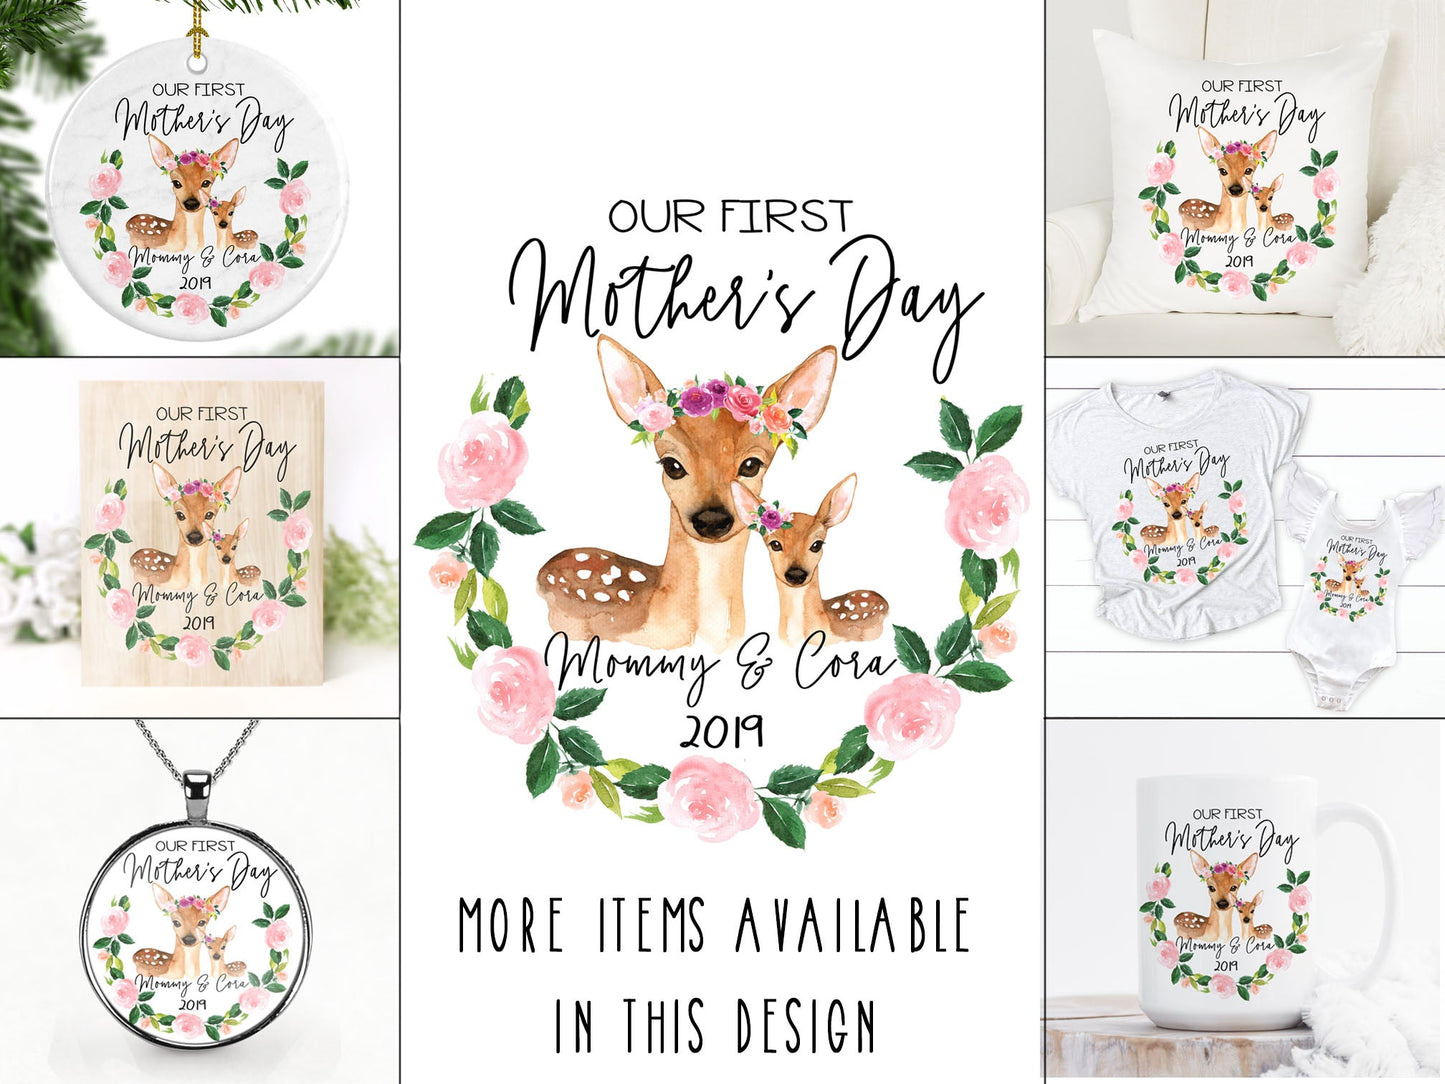 Our First Mother's Day Keepsake Mug - Squishy Cheeks